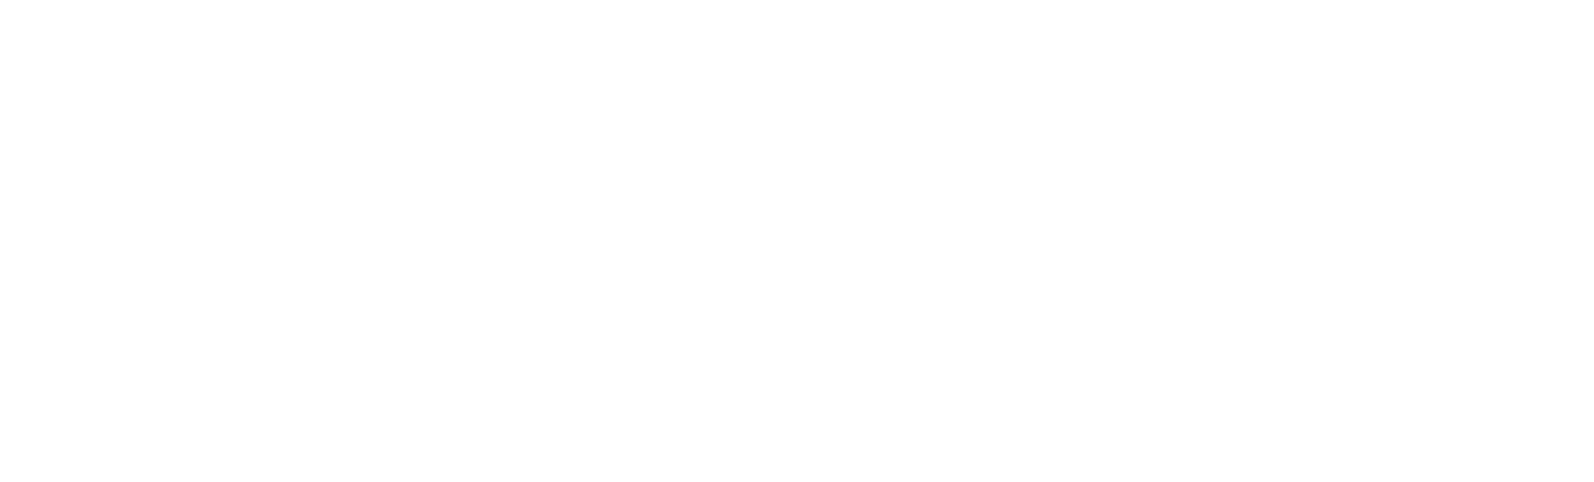 Awesomeness is our passion